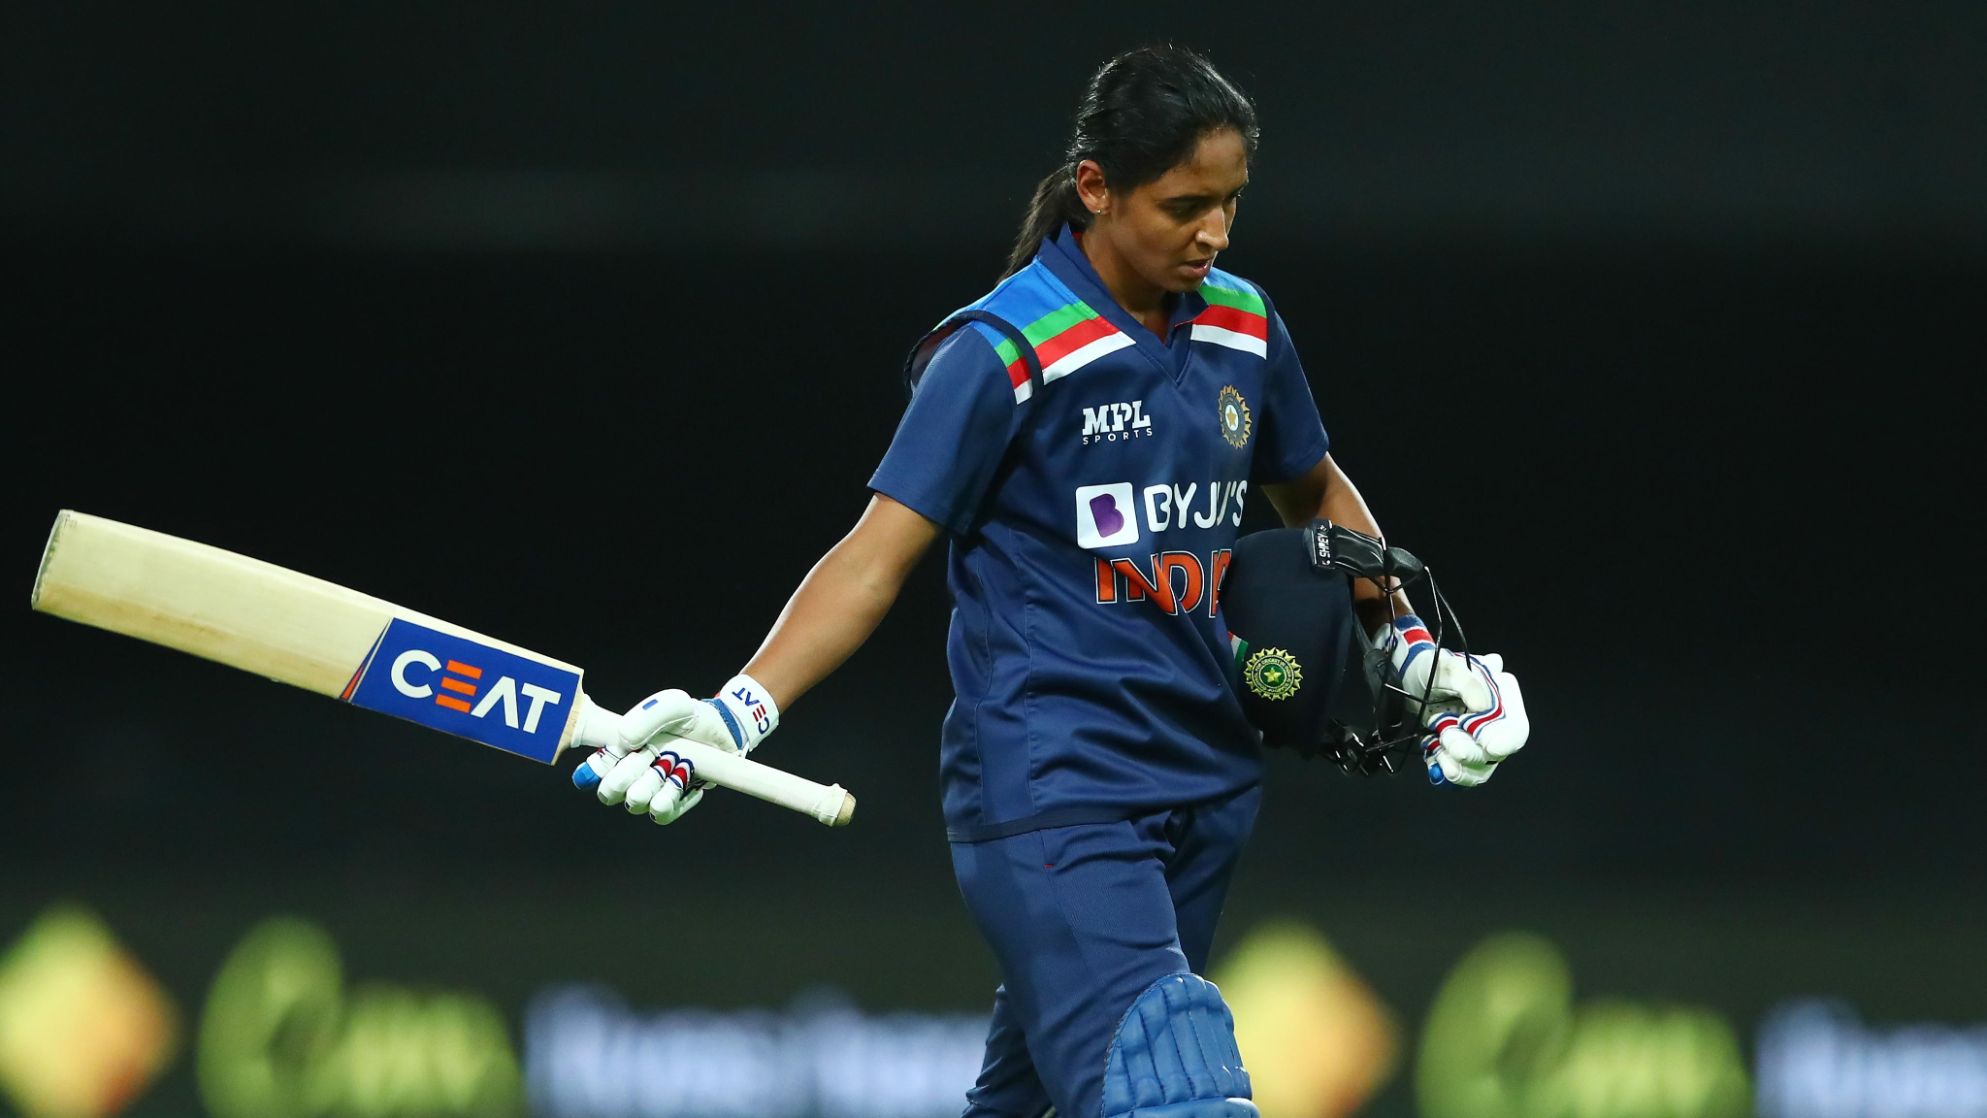 Harmanpreet calls for women’s IPL to improve players' performances in pressure situation